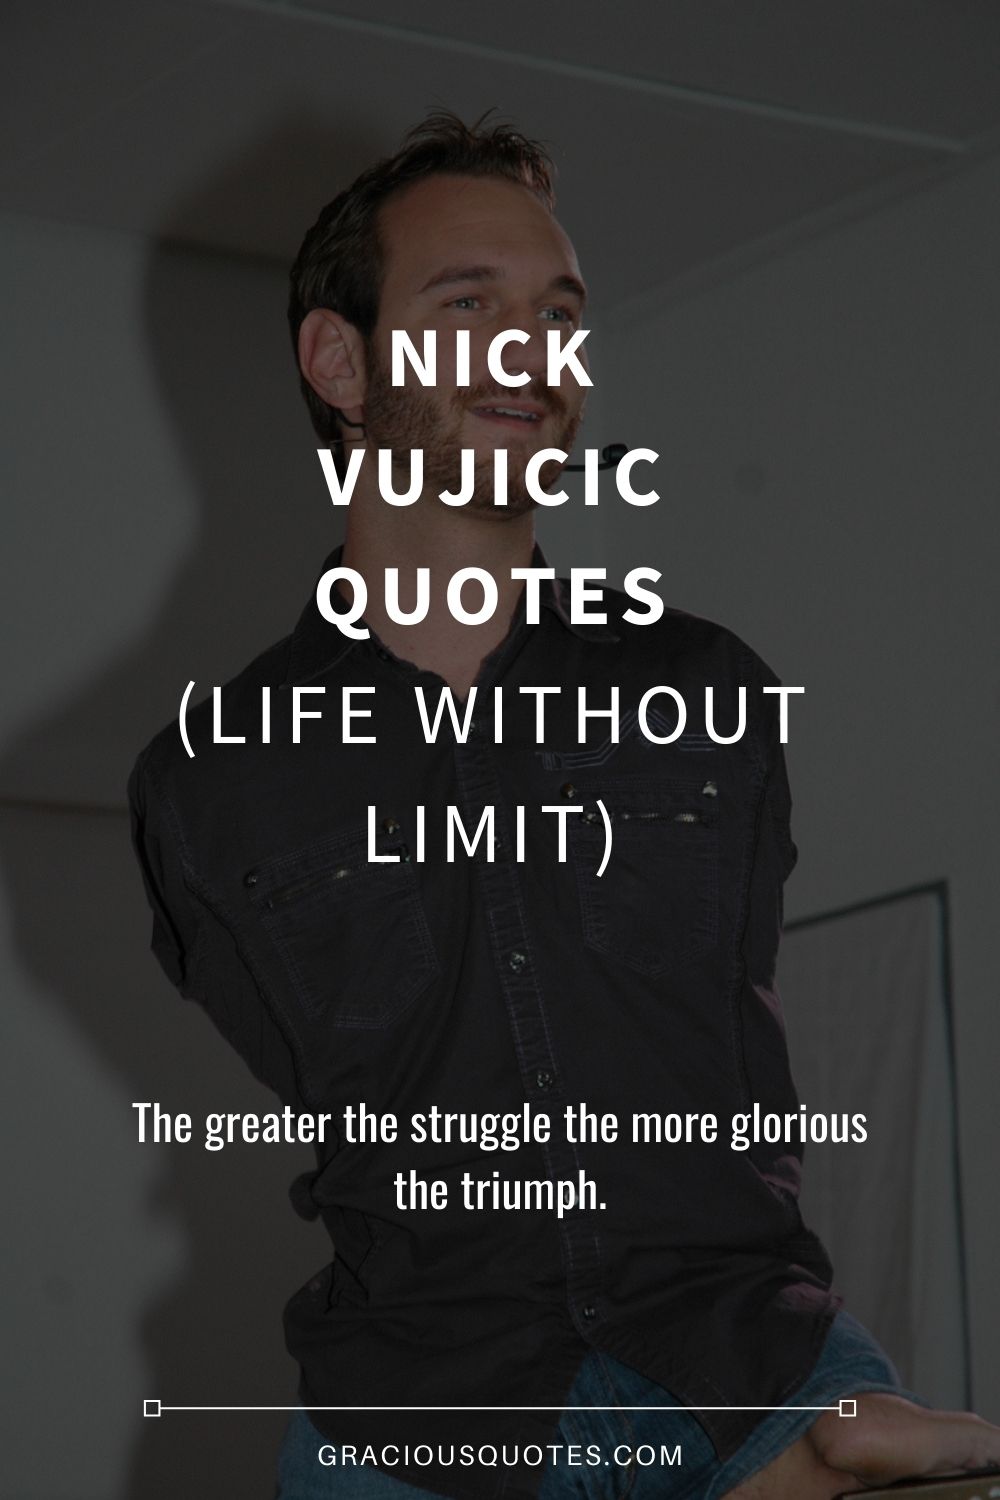 Nick Vujicic Quotes (LIFE WITHOUT LIMIT) - Gracious Quotes